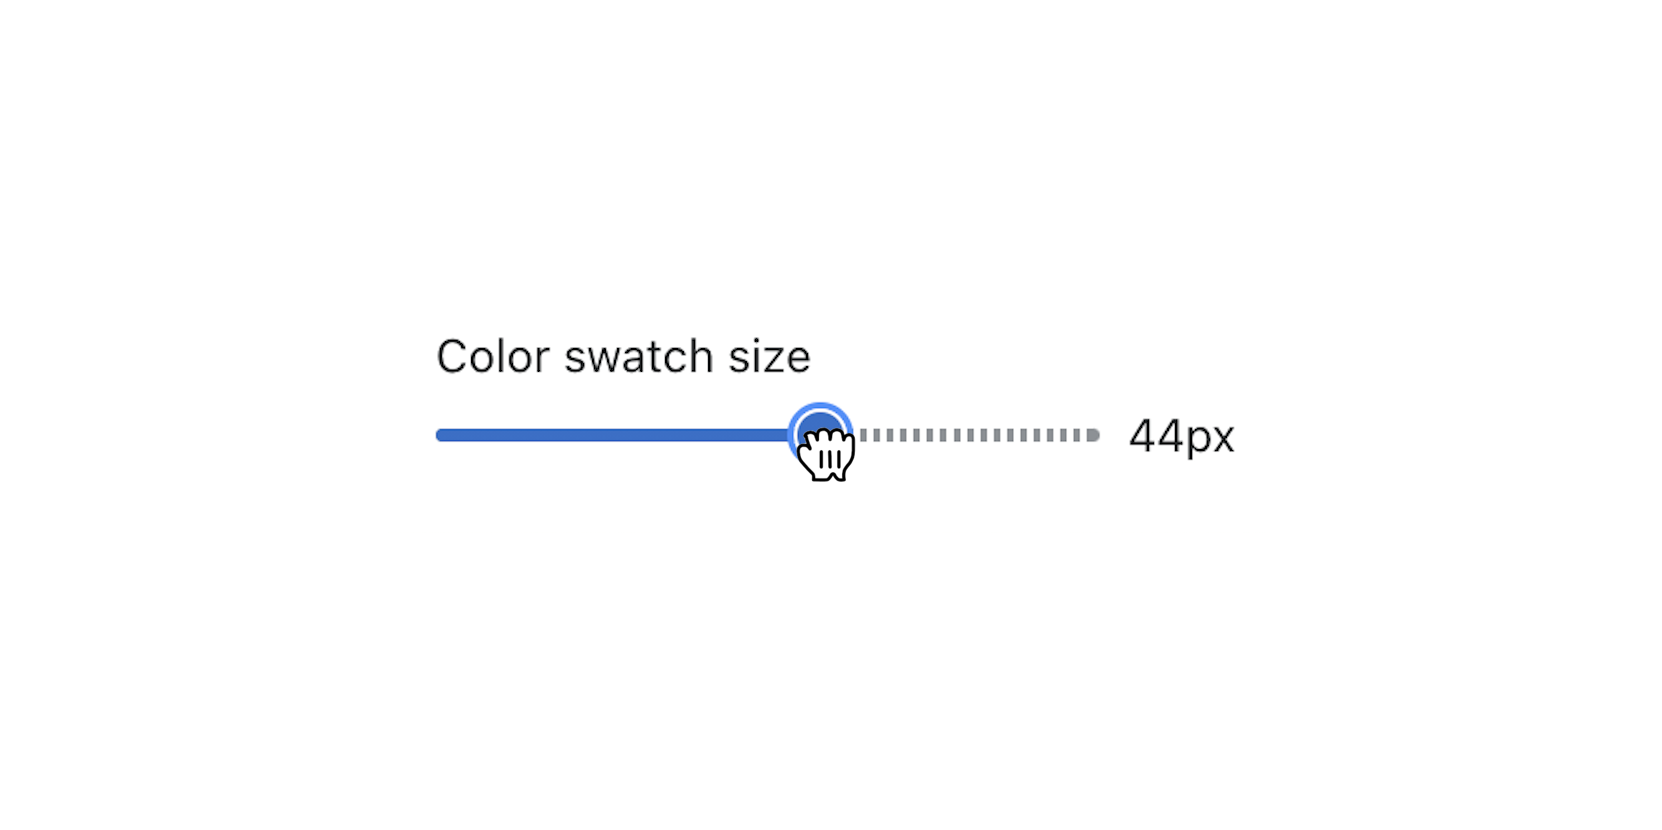 adjust_the_swatch_size_by_moving_the_provided_slider.png